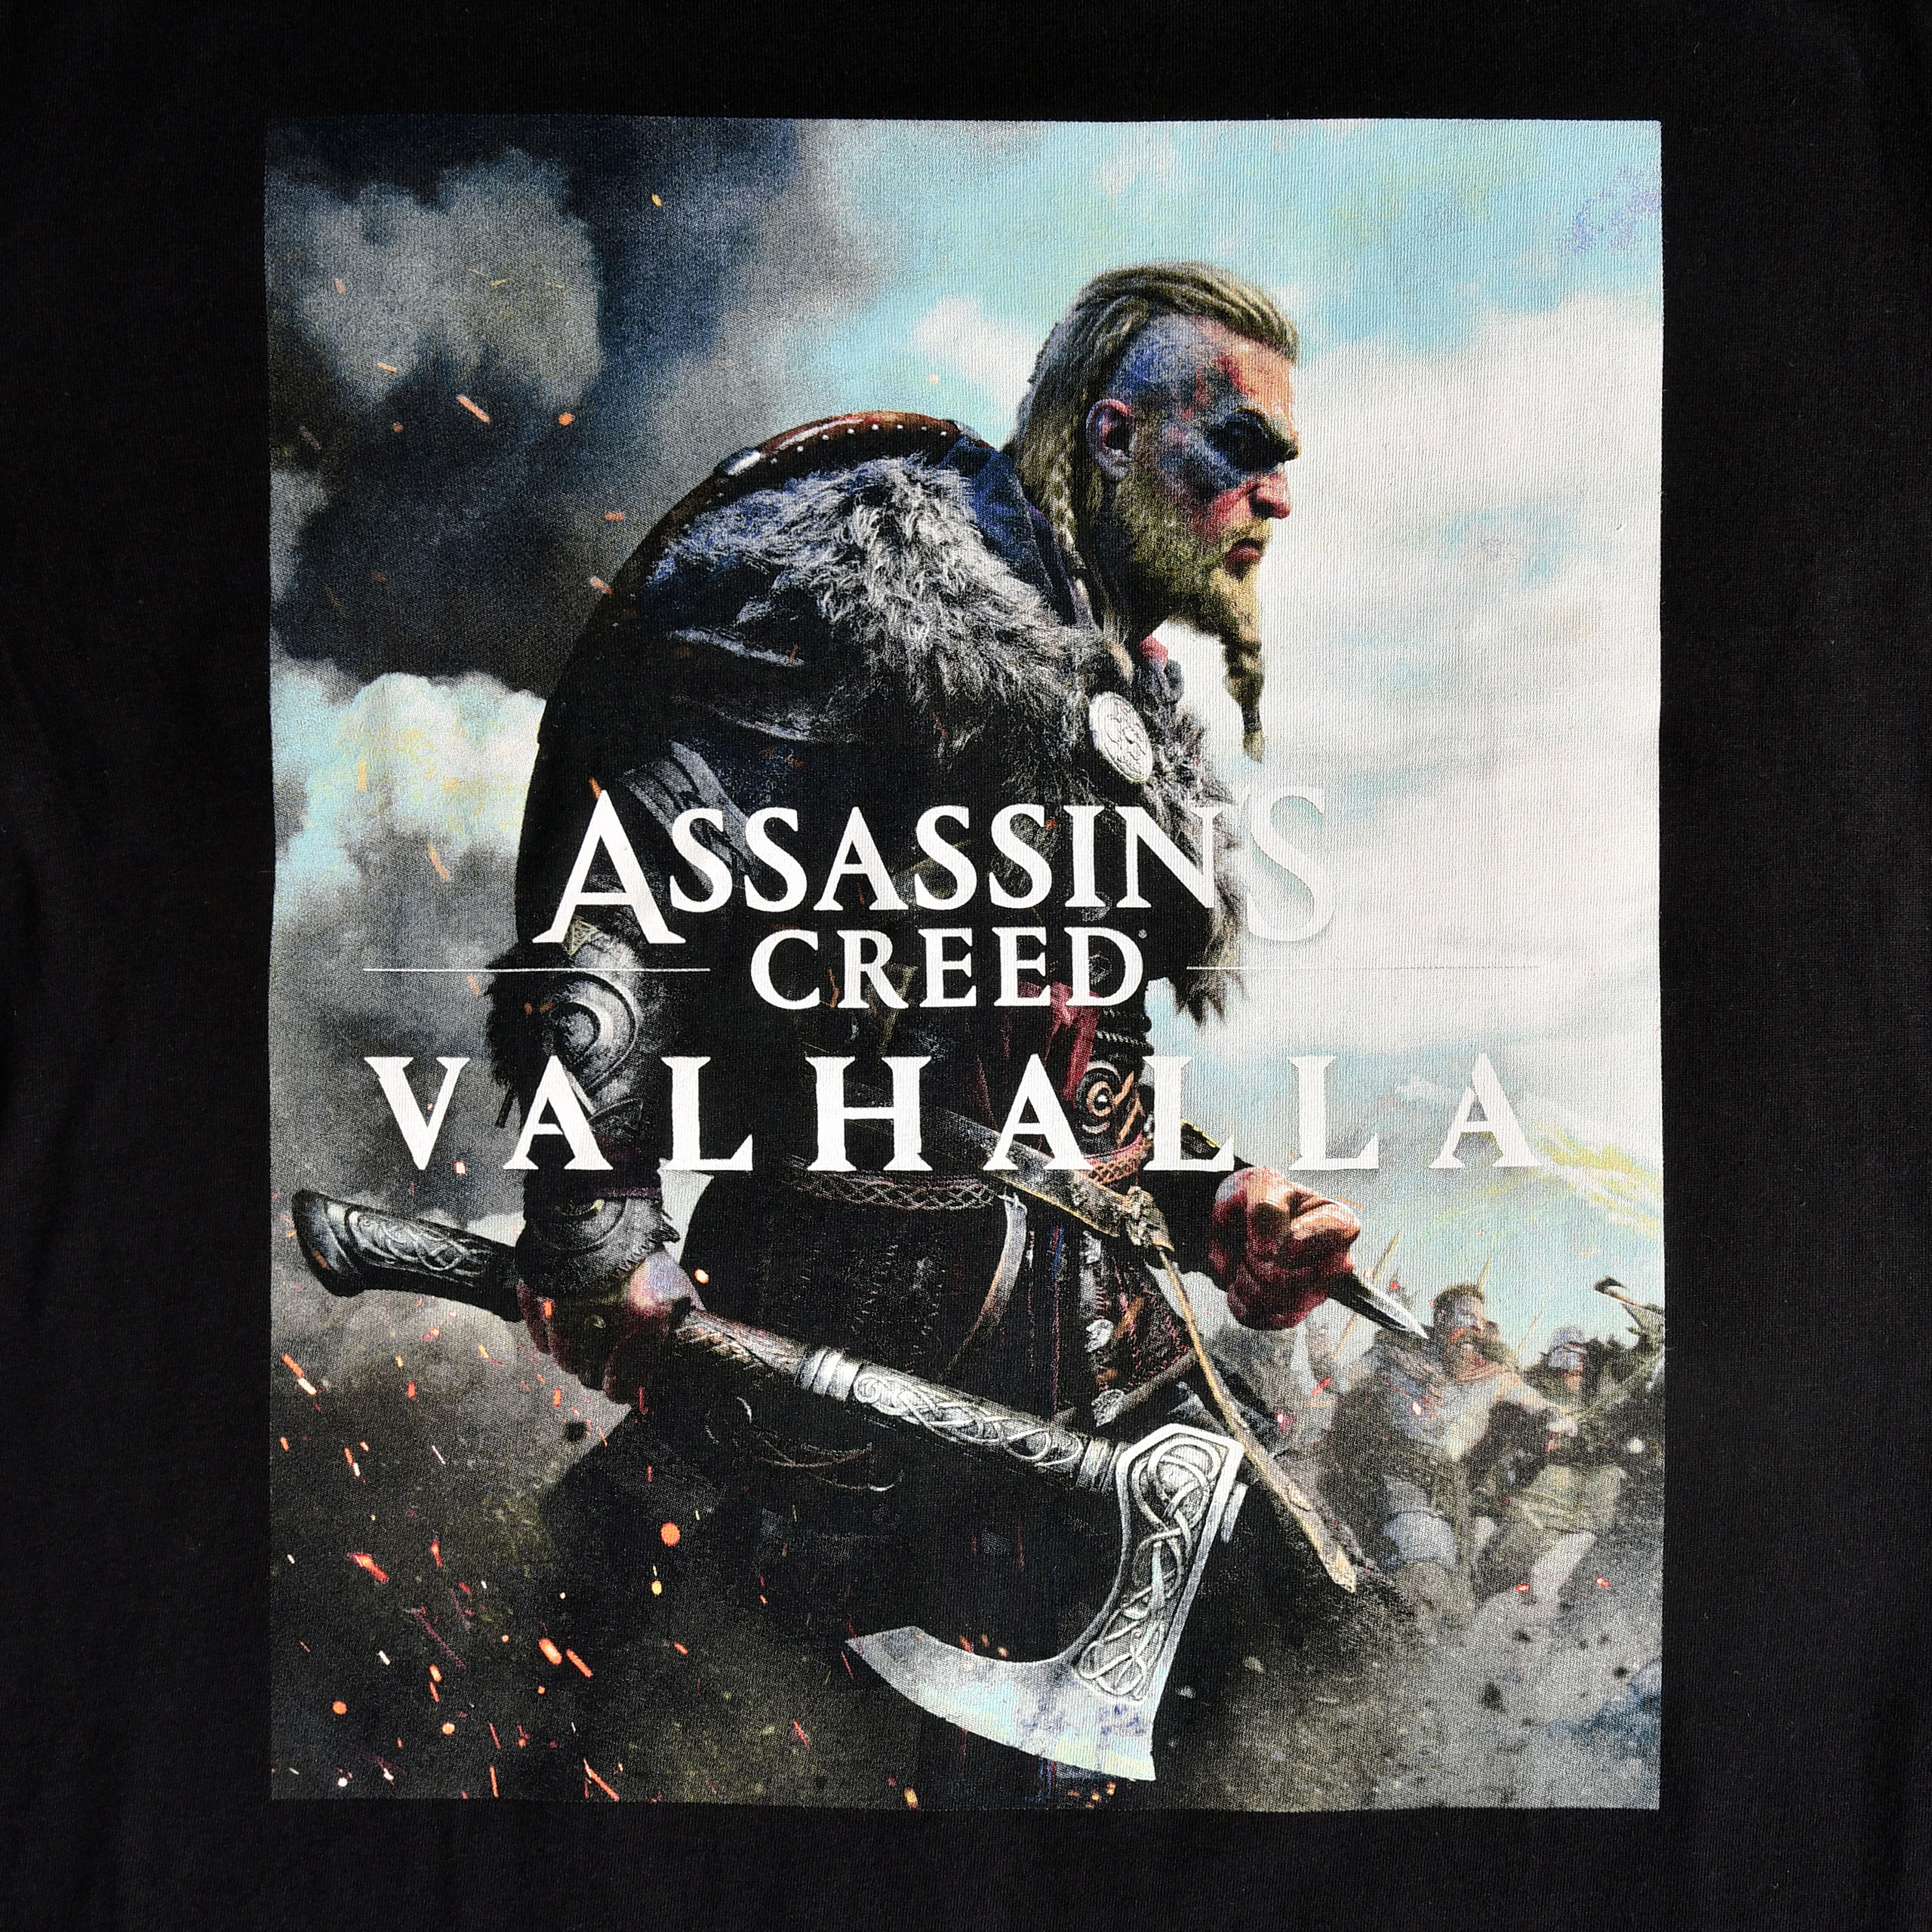 Assassin's Creed - Valhalla Cover T-Shirt Black